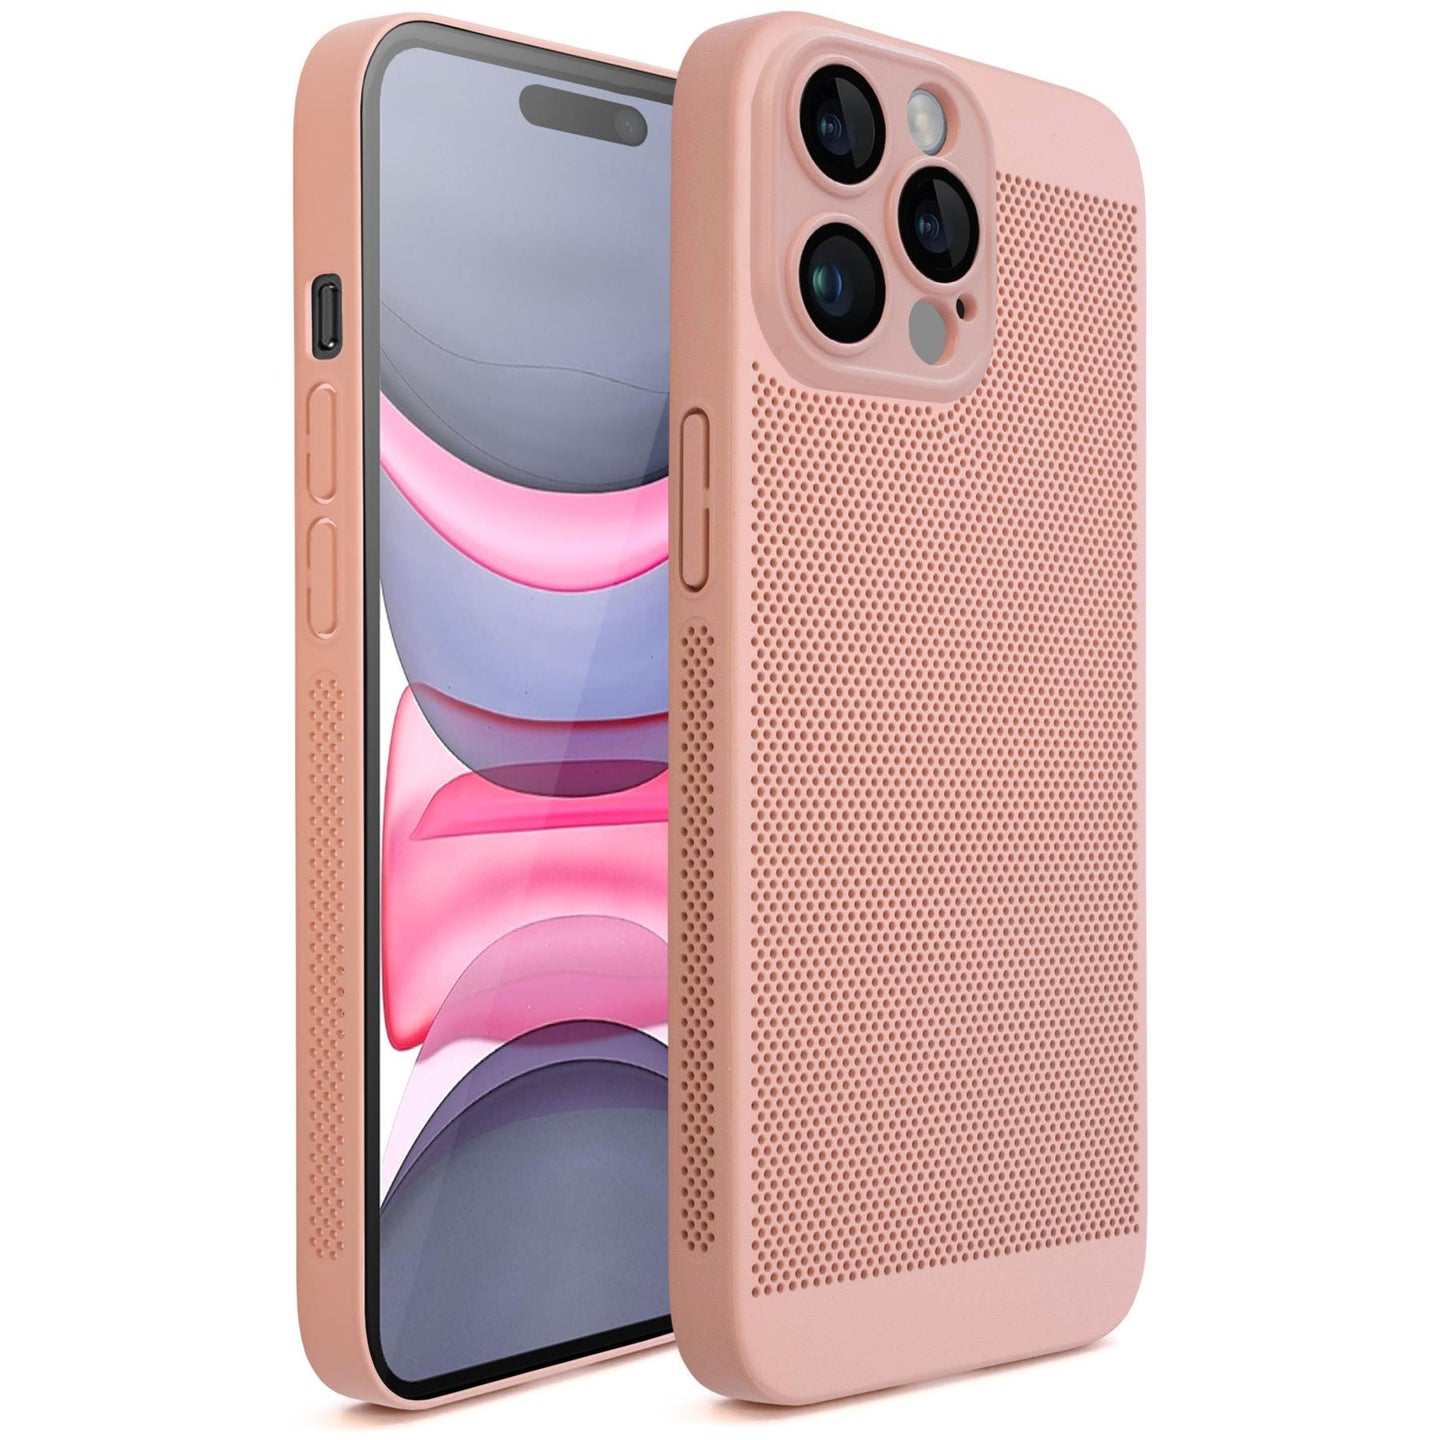 Moozy VentiGuard Phone Case for iphone 14 pro, 6.1-inch, Breathable Cover for iphone 14 pro with Perforated Pattern for Air Circulation, Hard case for iphone 14 pro, Pink Pastel